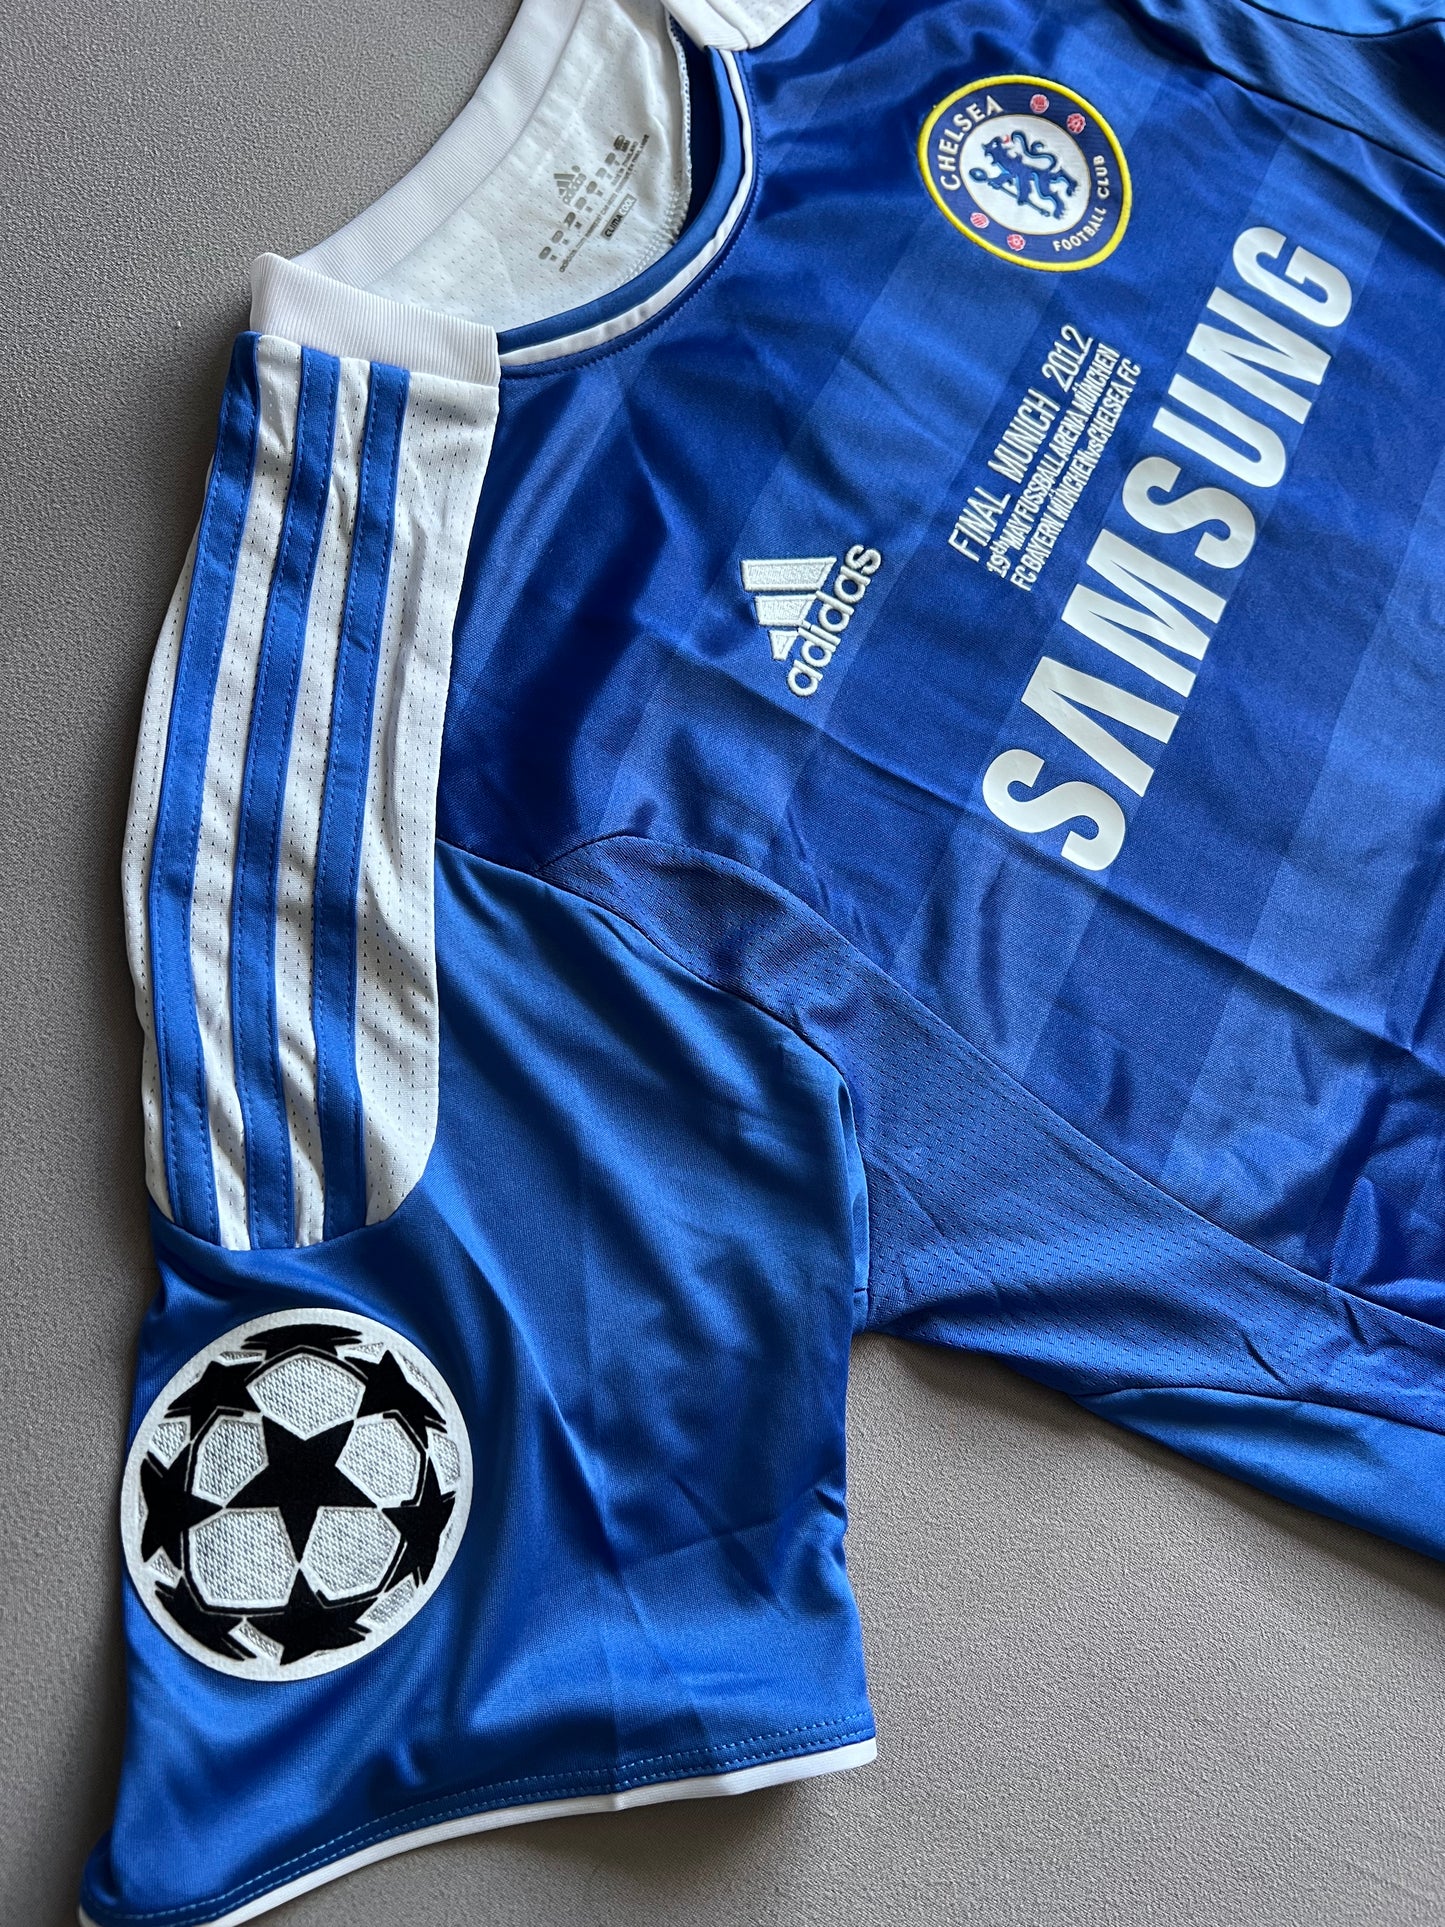 Chelsea 2011/12 Home jersey